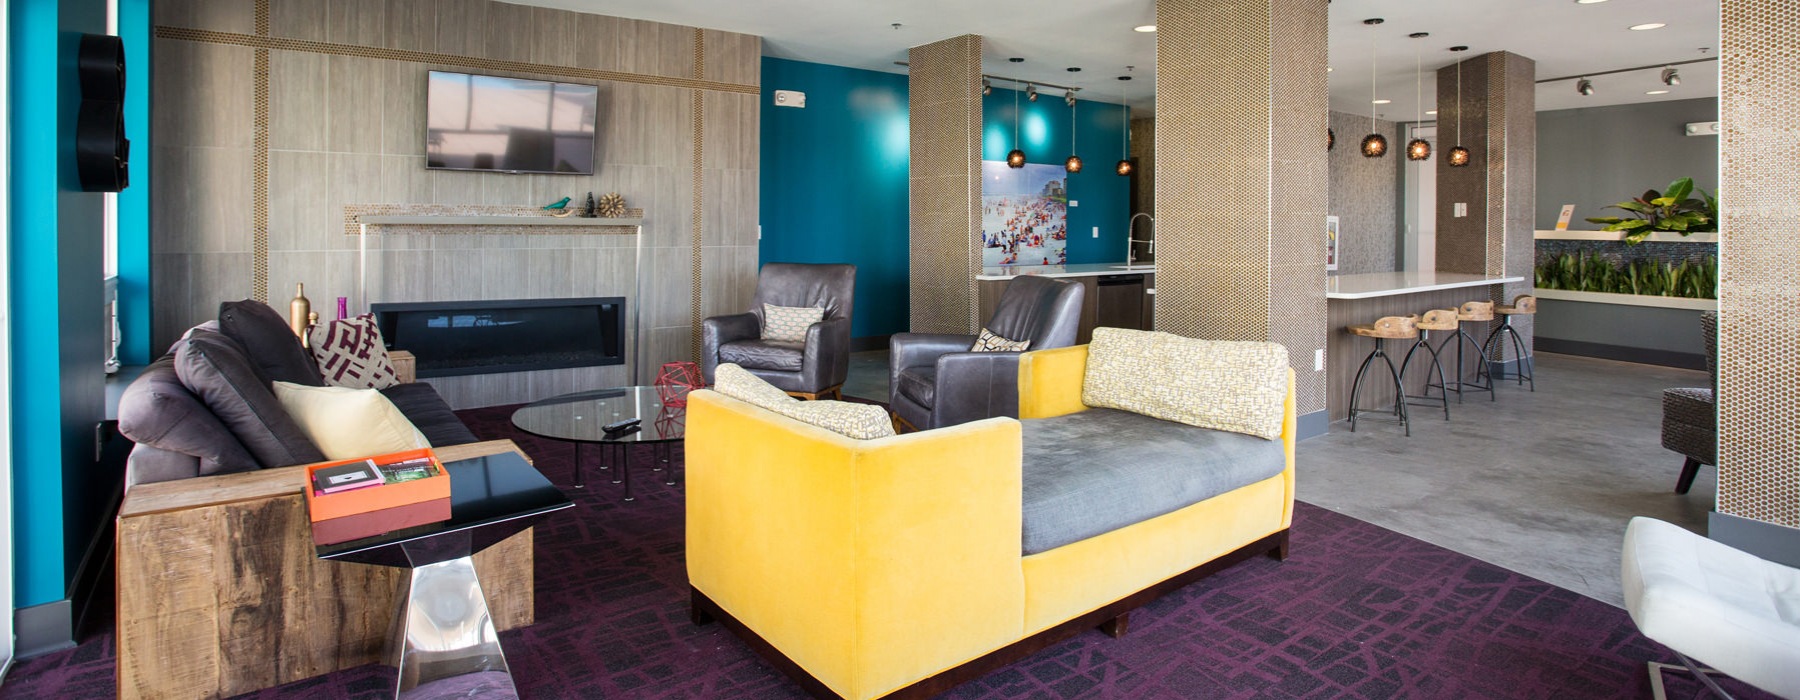 Resident clubhouse with yellow couch